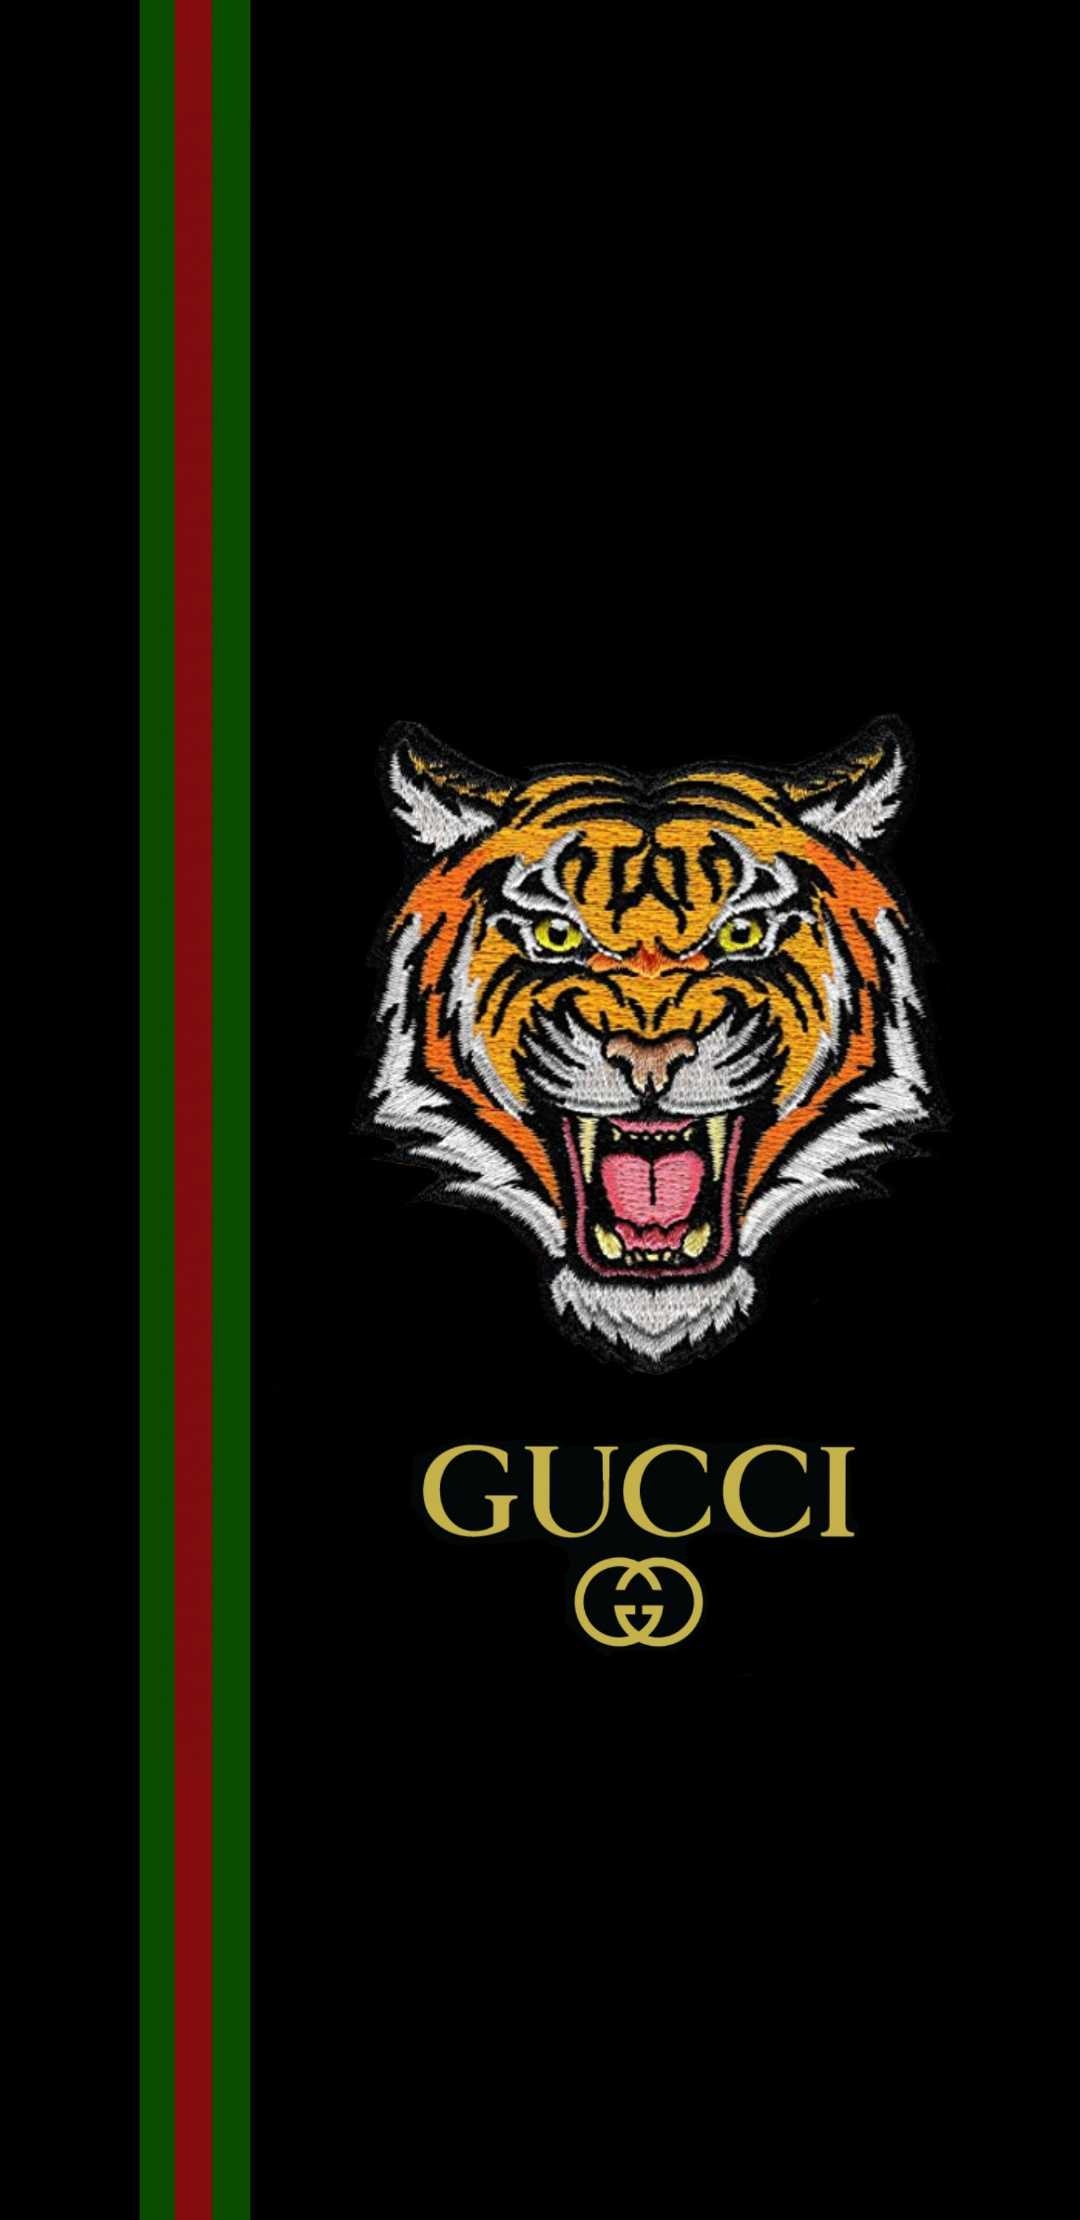 Gucci: Graceful, powerful and majestic, The tiger synonymous with Alessandro Michele's creative vision. 1080x2220 HD Background.